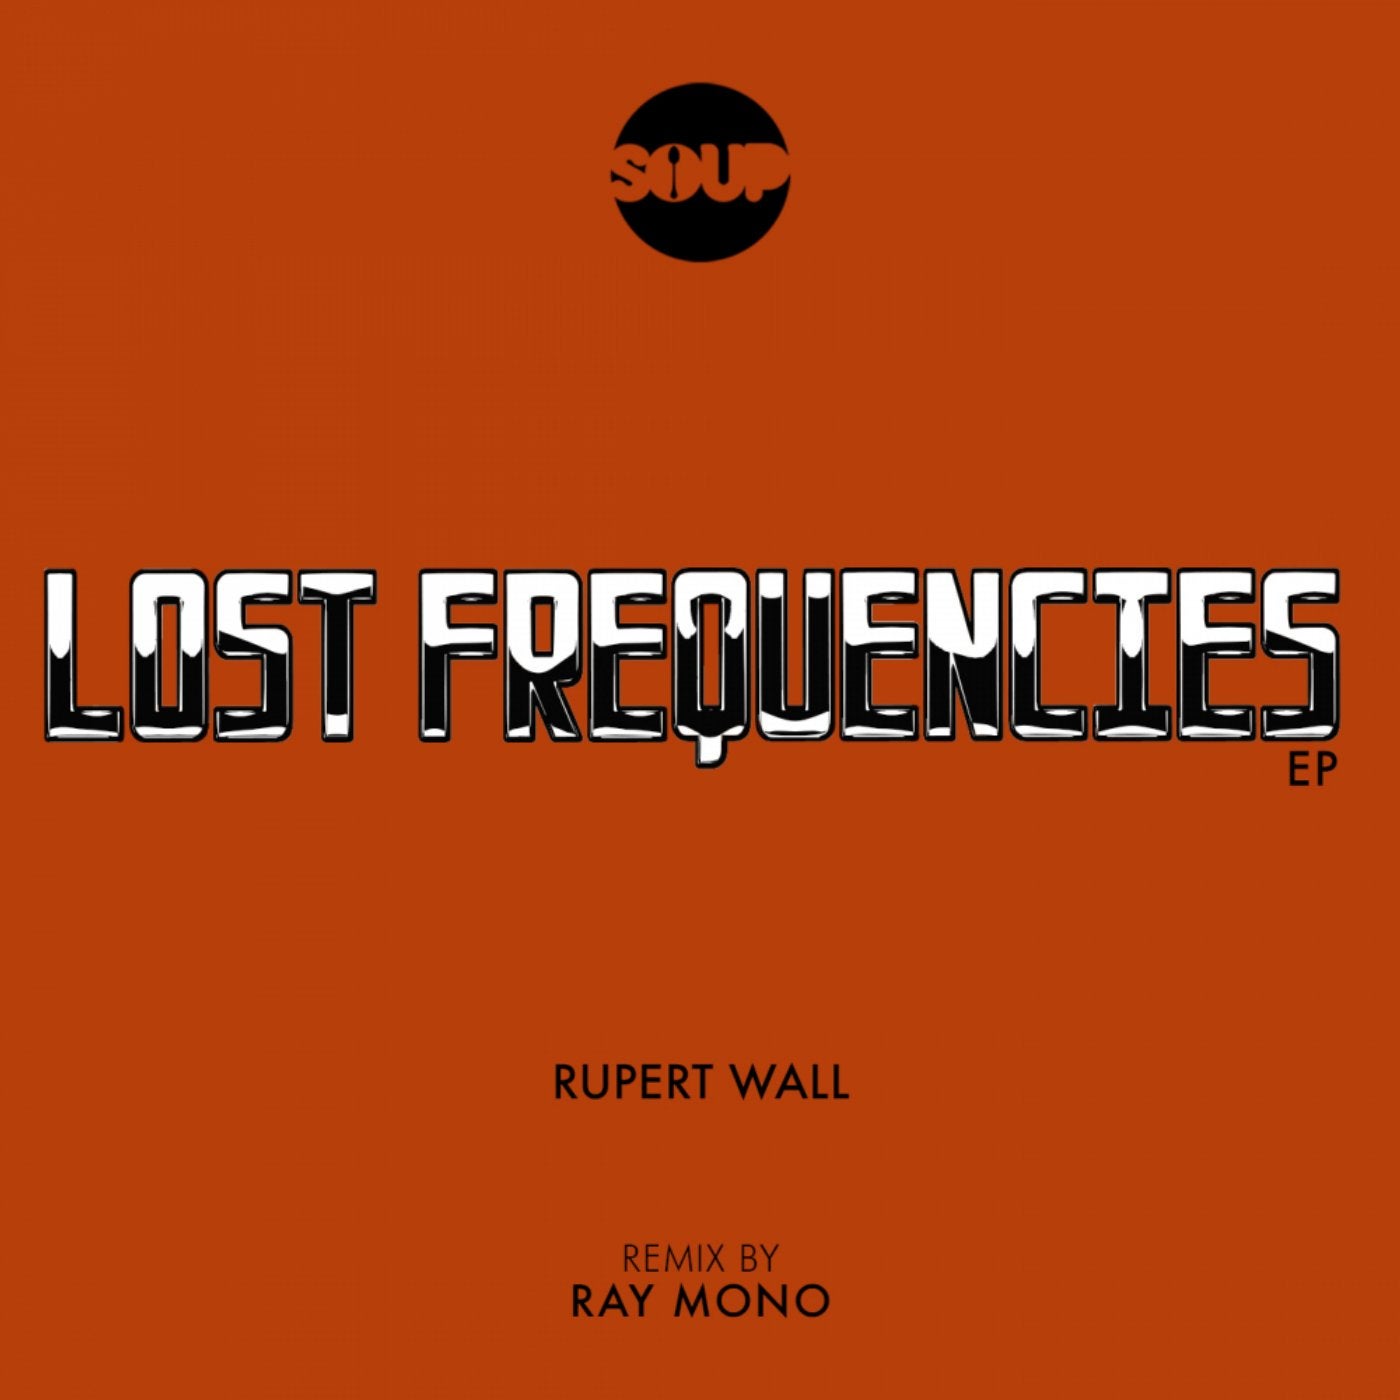 Lost Frequencies EP